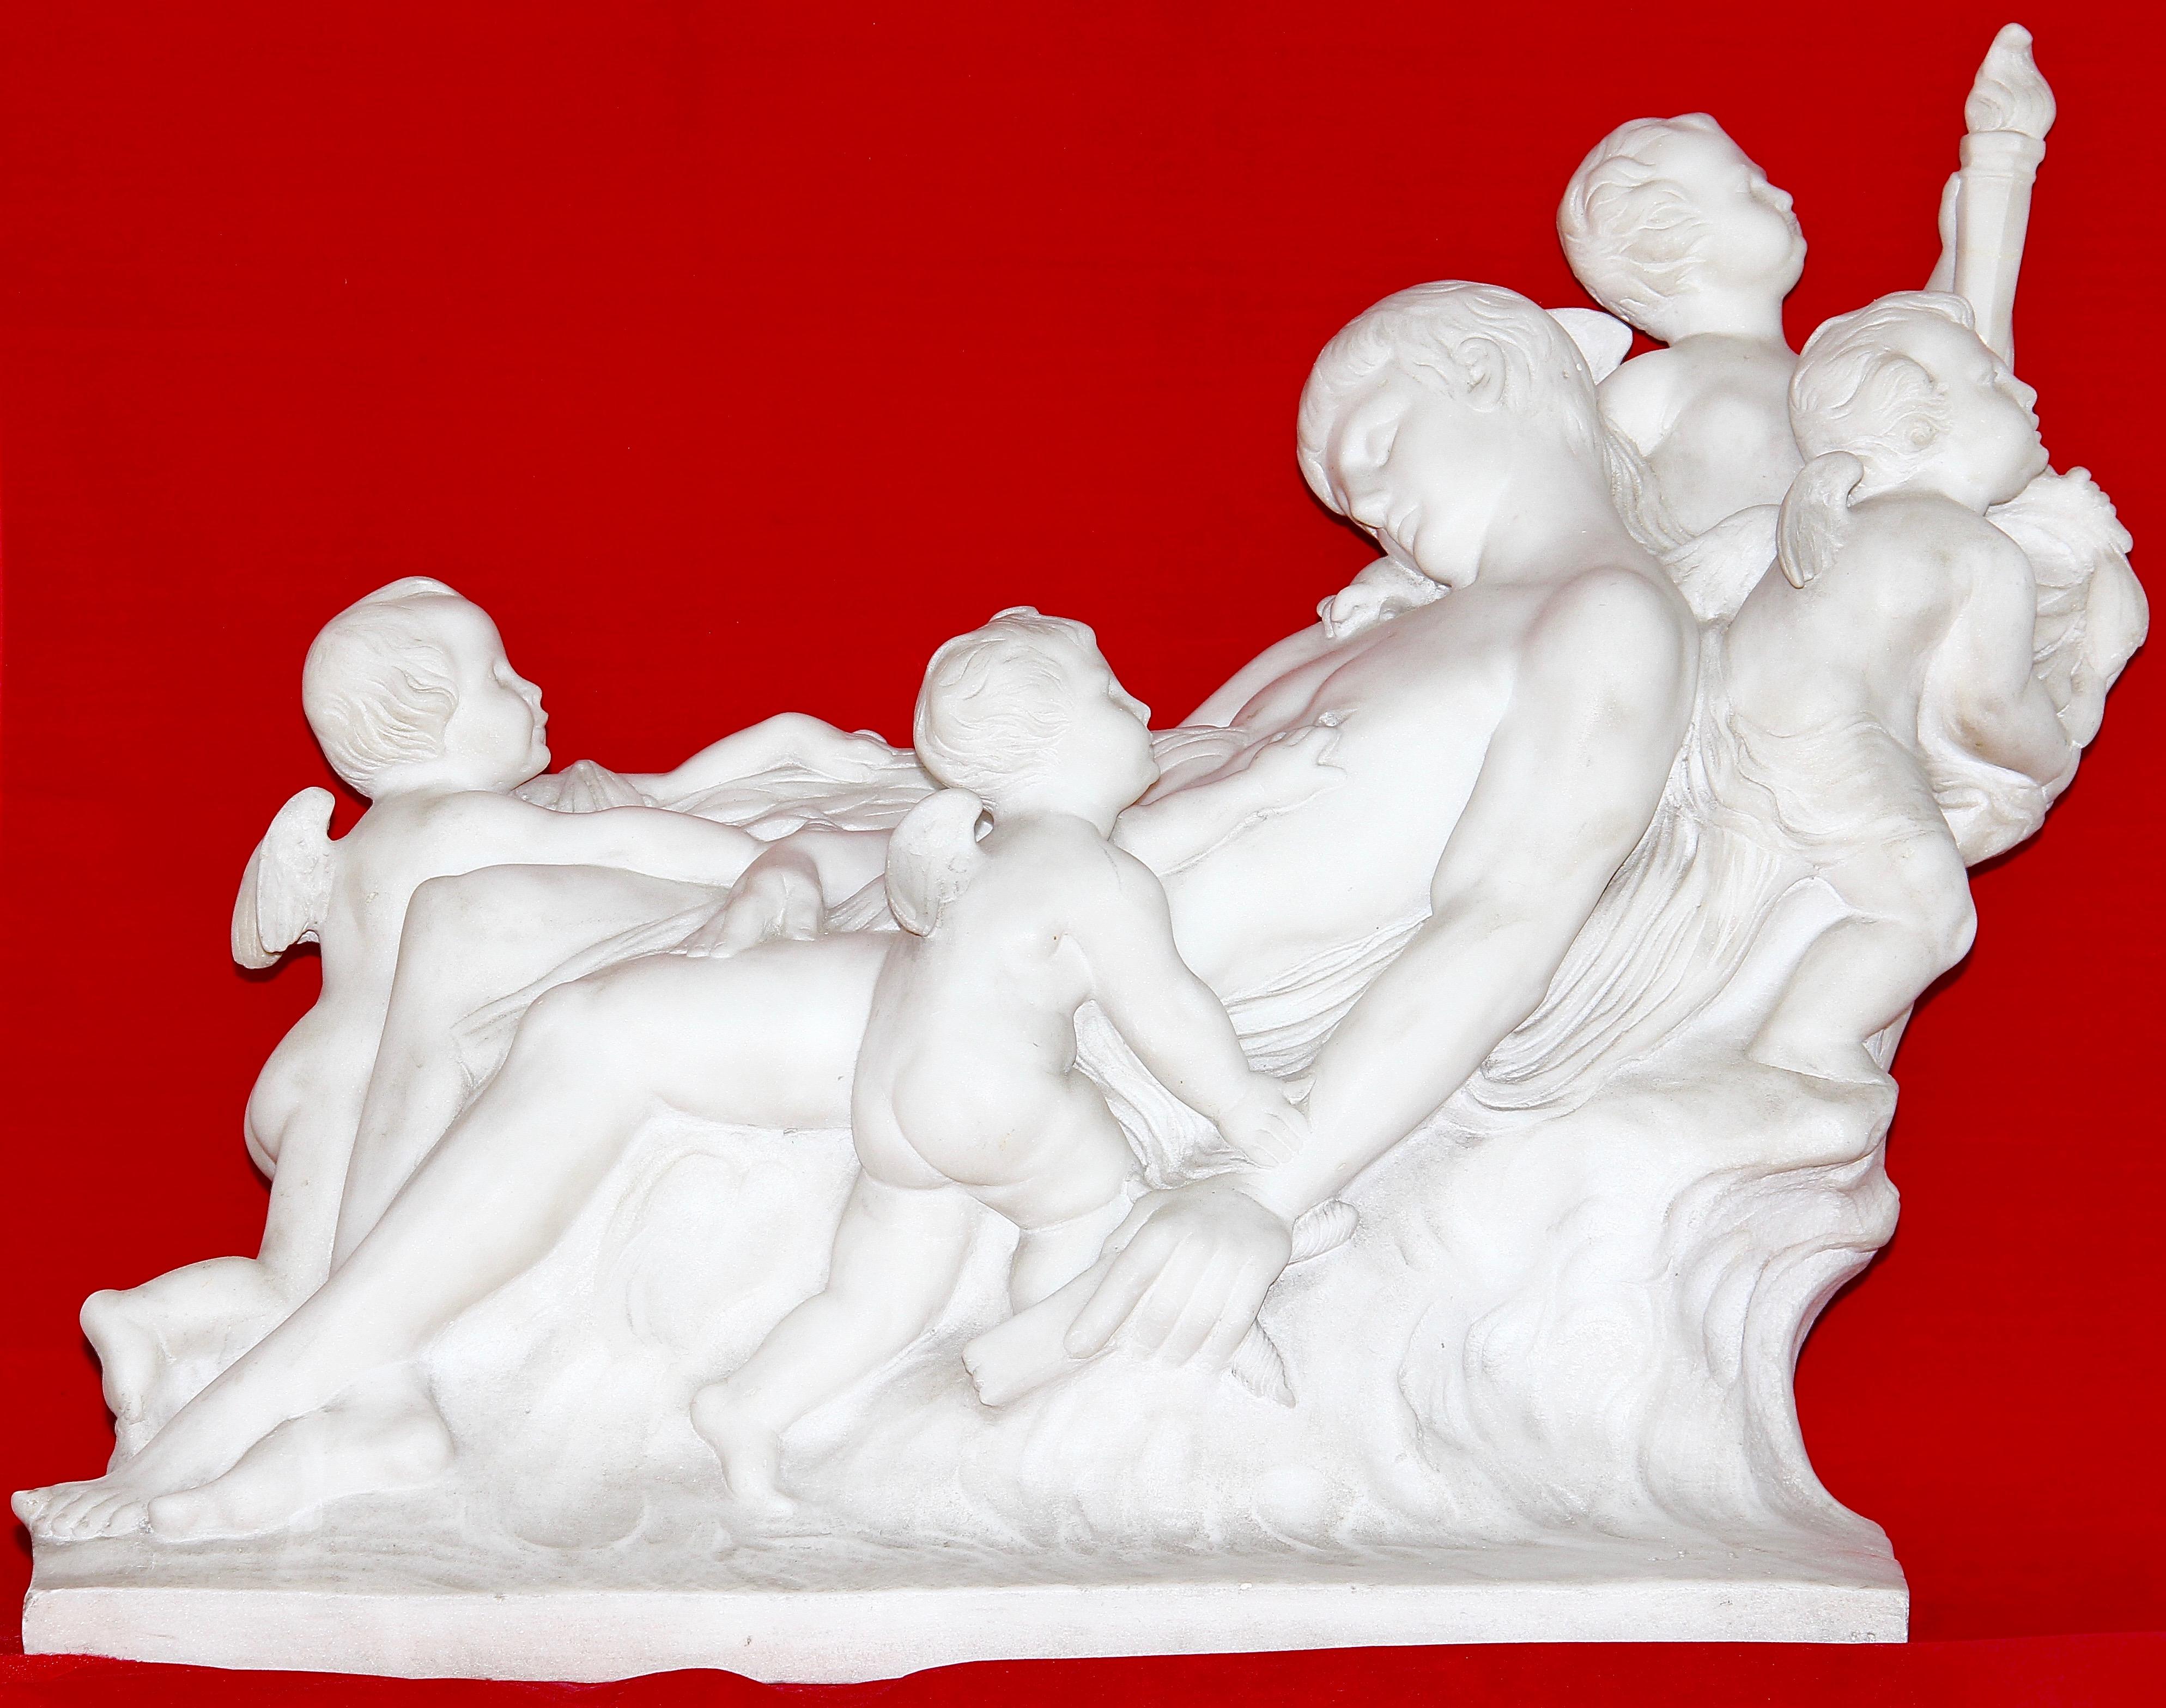 Antique alabaster figurine group. Mythological scene, 19th century.
Extremely heavy and very decorative.
Monogrammed.

The torch has been restored.
Small damage on the left wing on one putto.